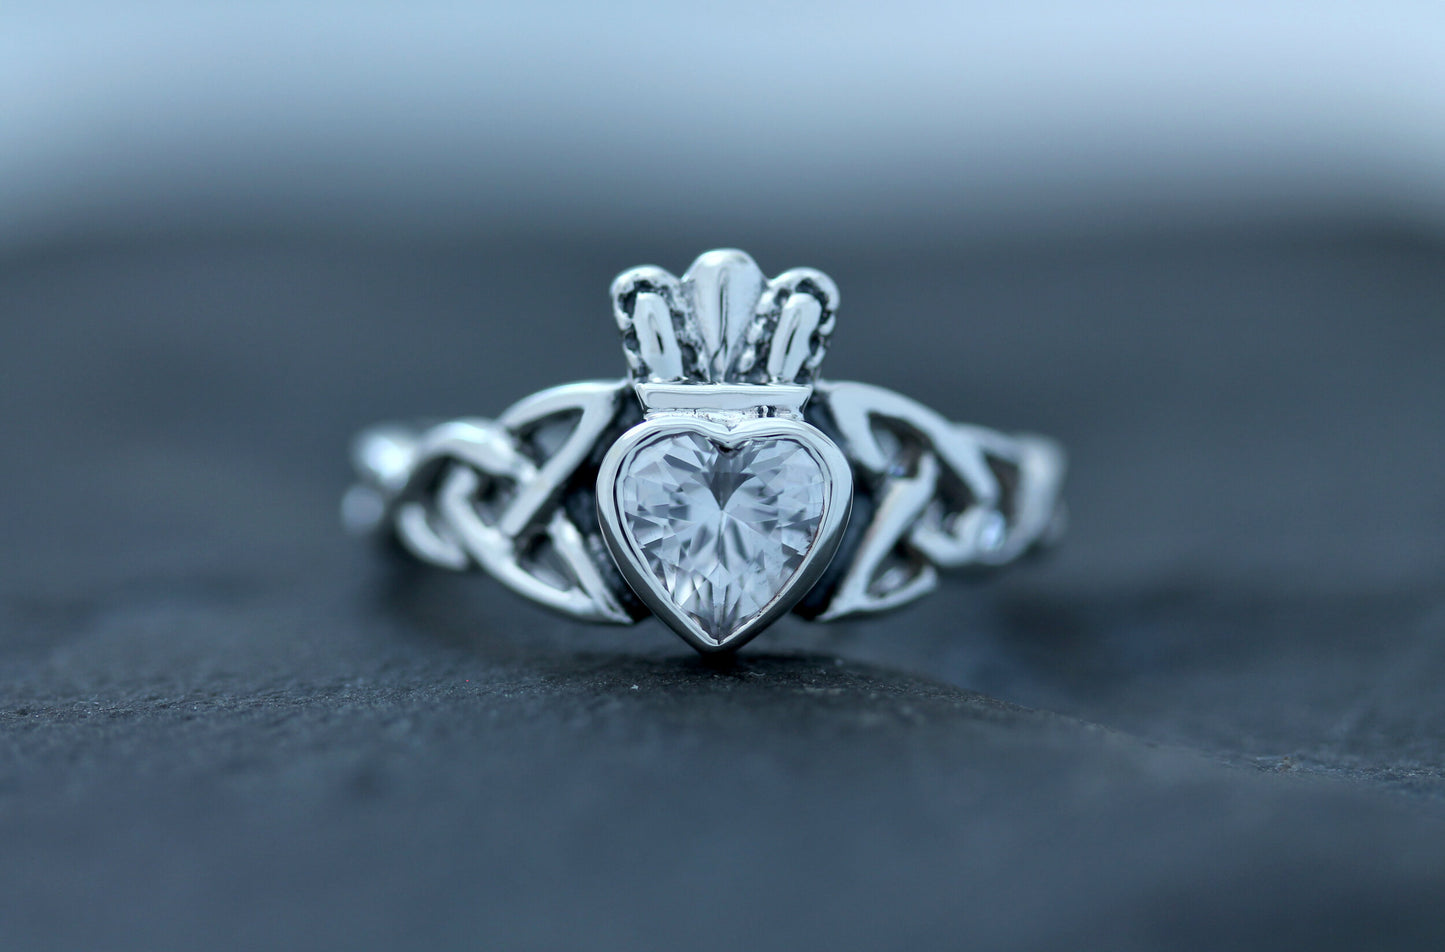 Claddagh Ring - Trinity Knot with Royal Crown with Clear Zircon